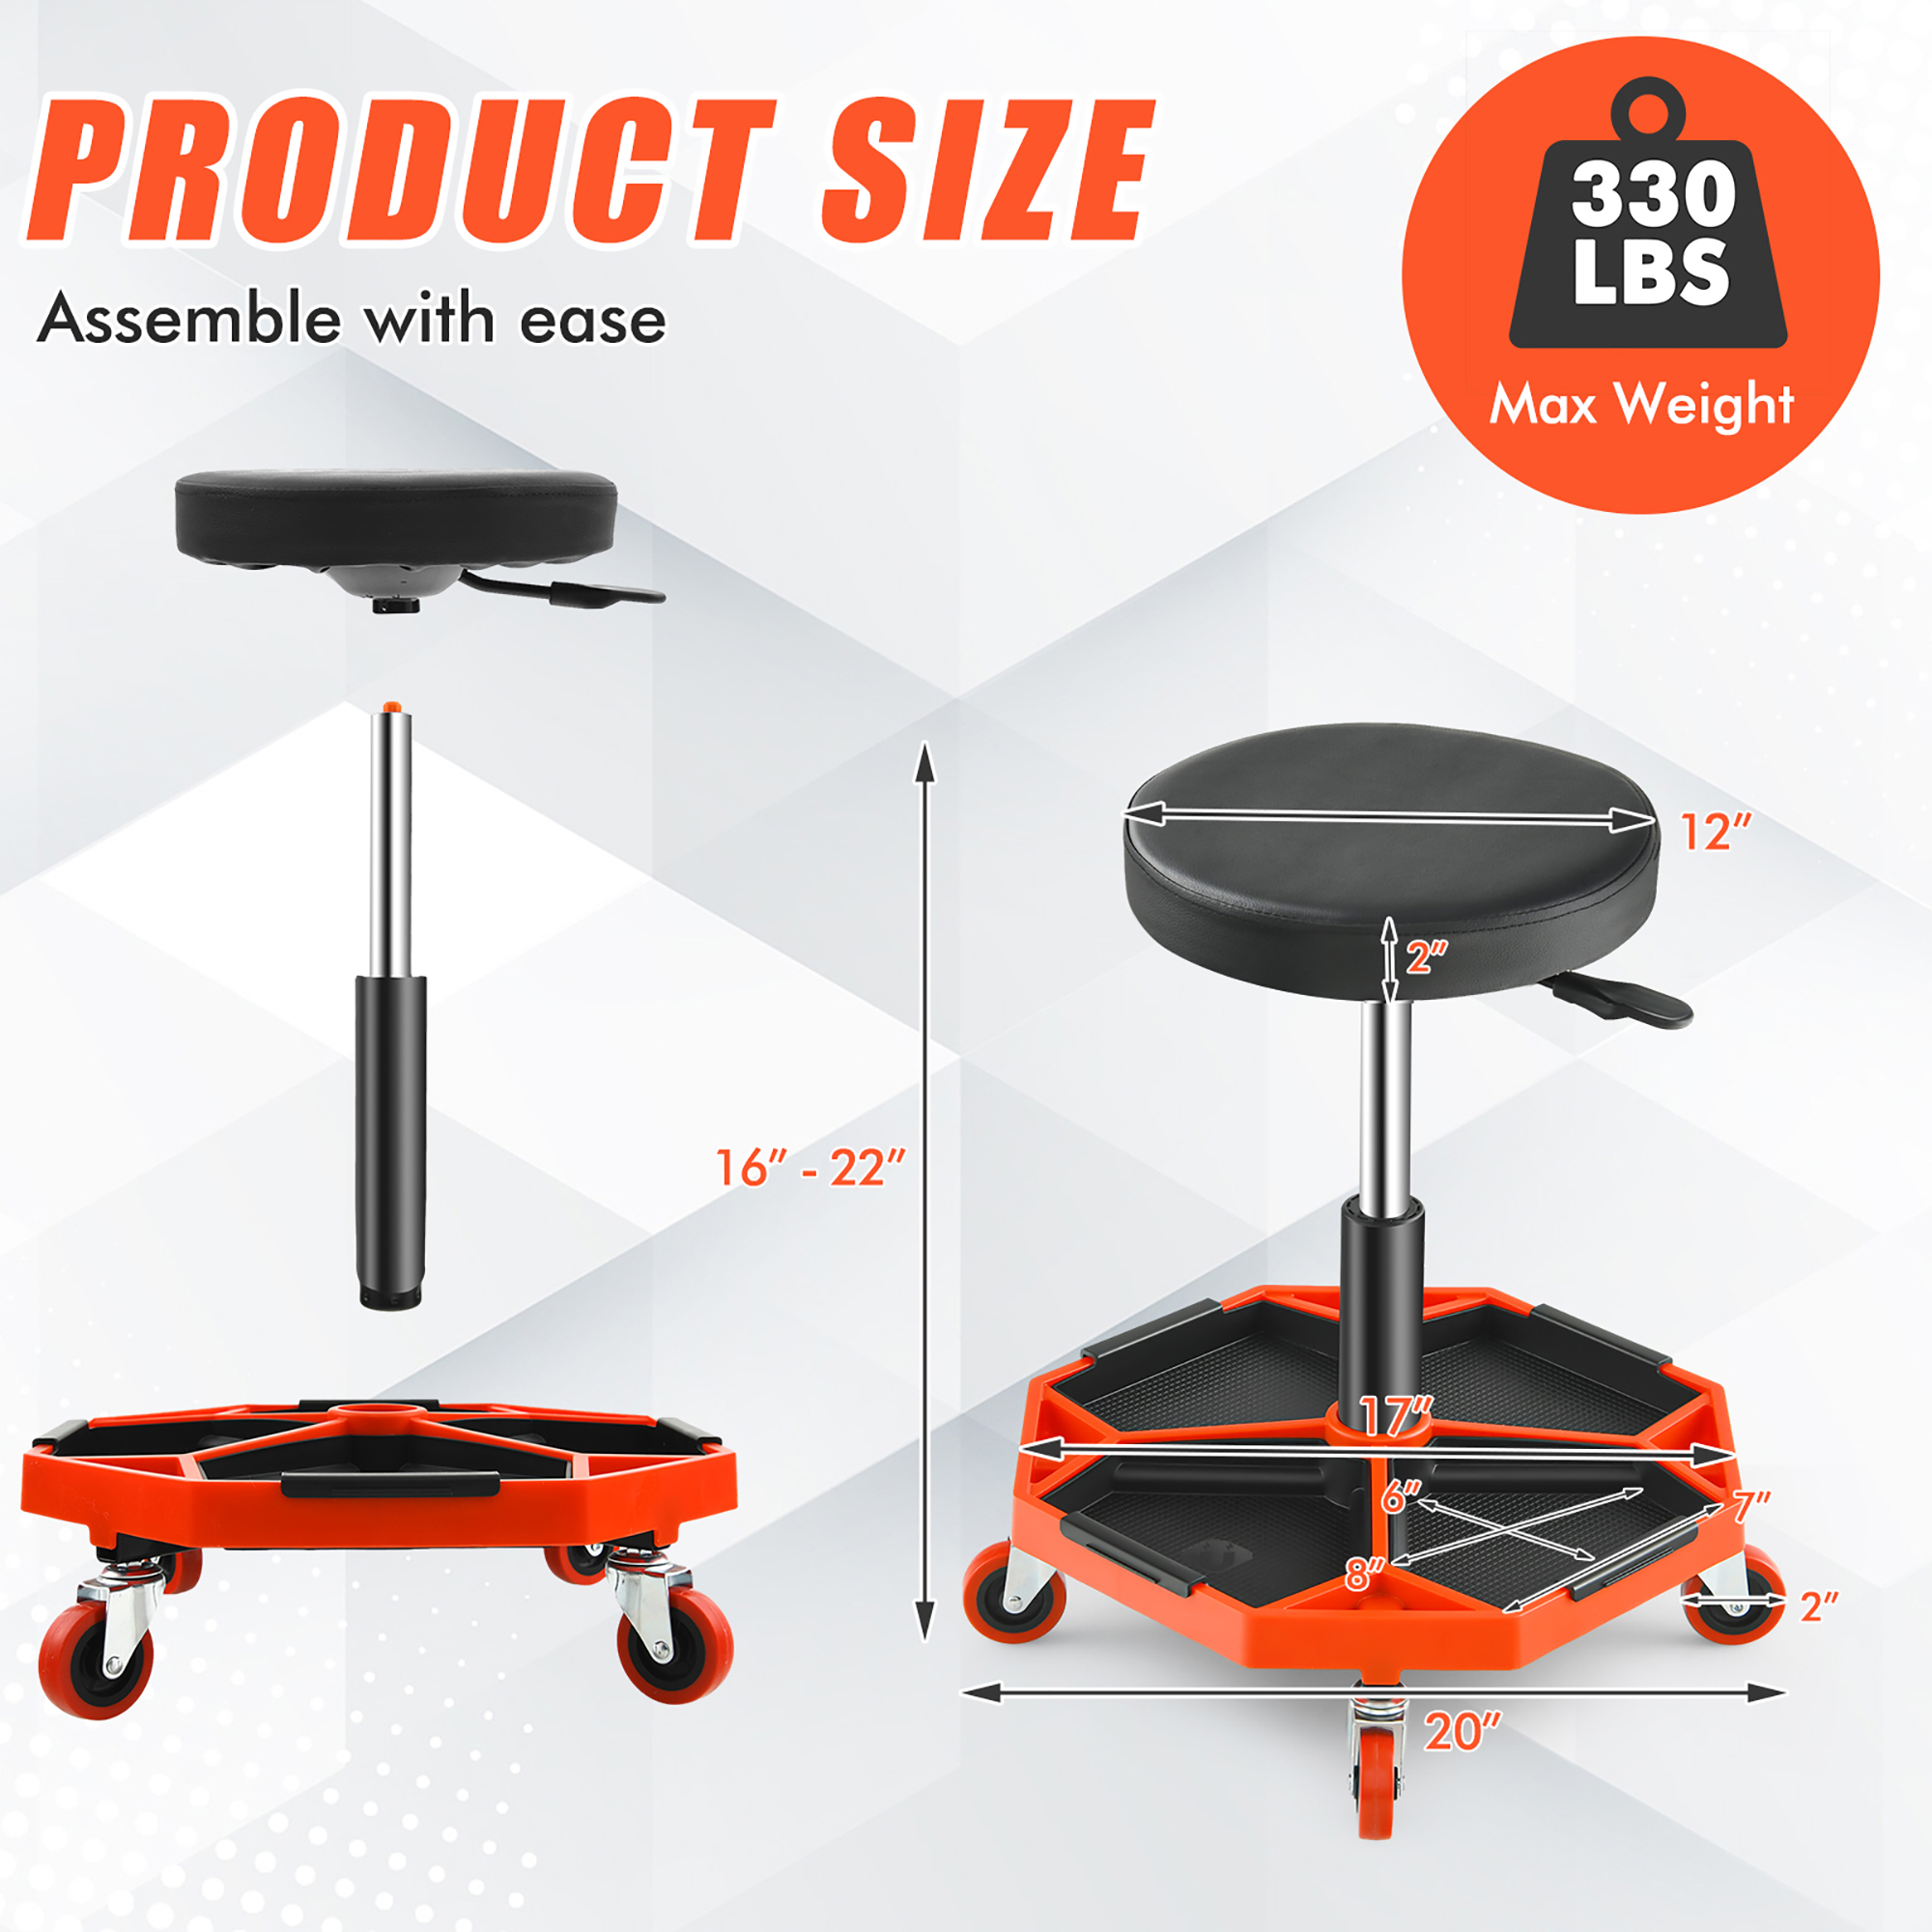 Costway Heavy-Duty Adjustable Height Rolling Stool withTool Tray Storage 330 LBS Capacity